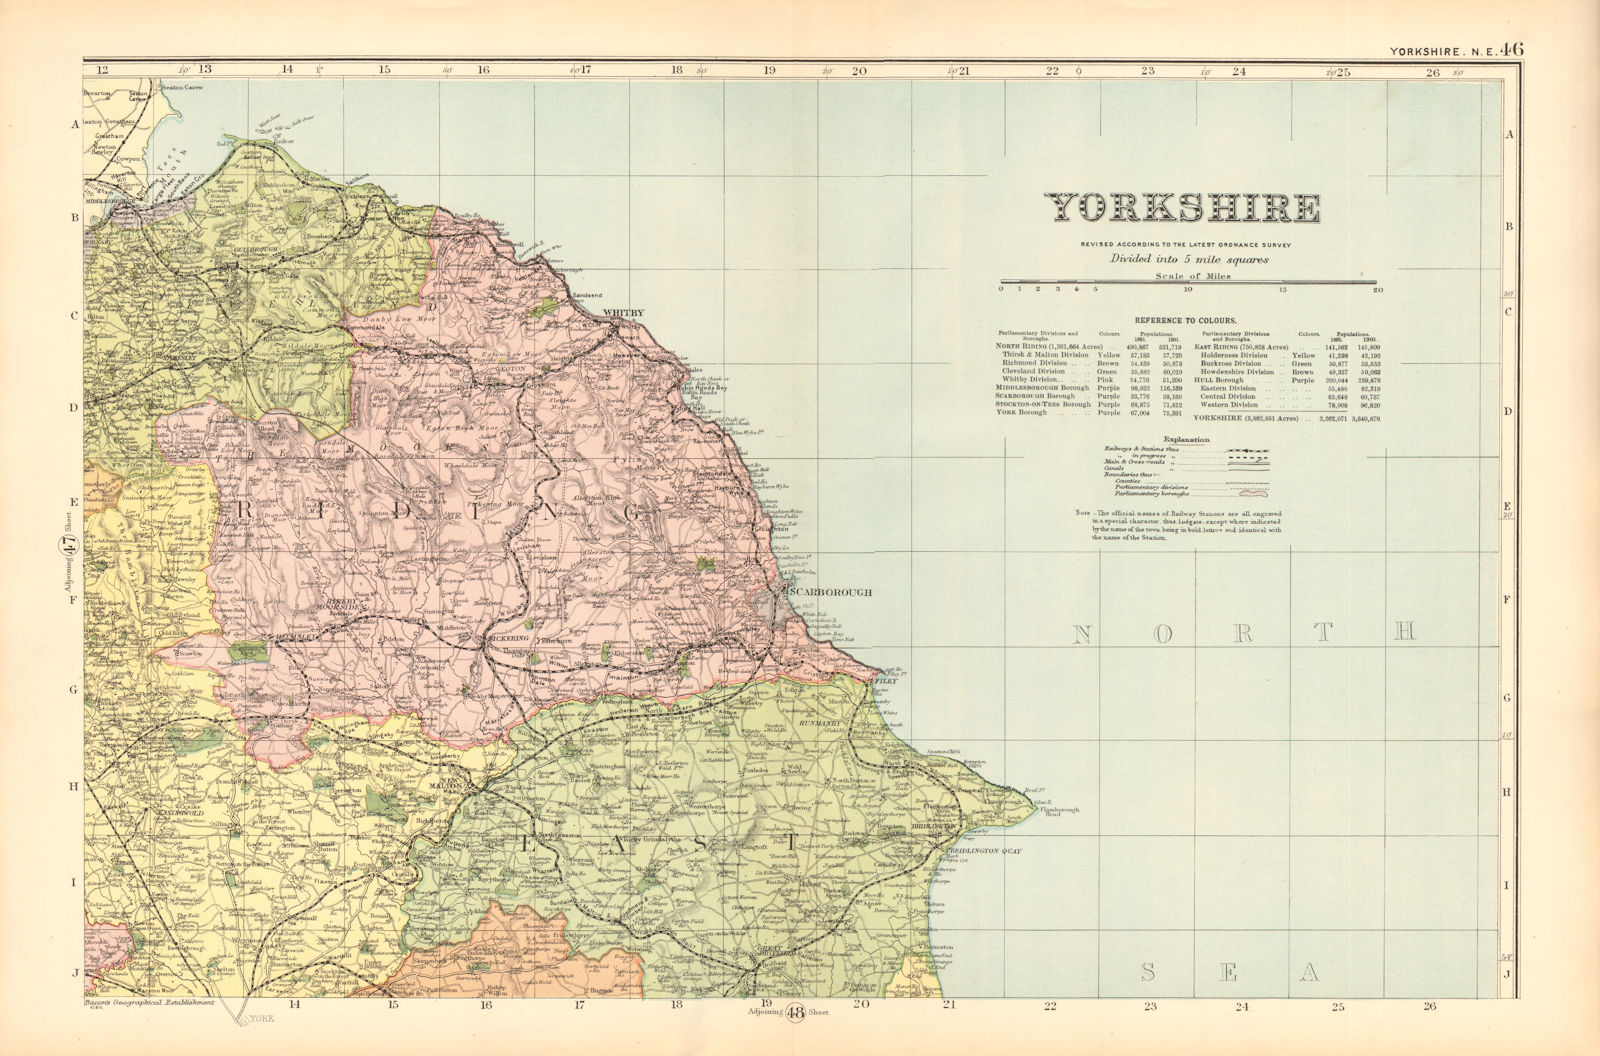 YORKSHIRE (NORTH EAST). Showing Parliamentary divisions & parks. BACON 1904 map